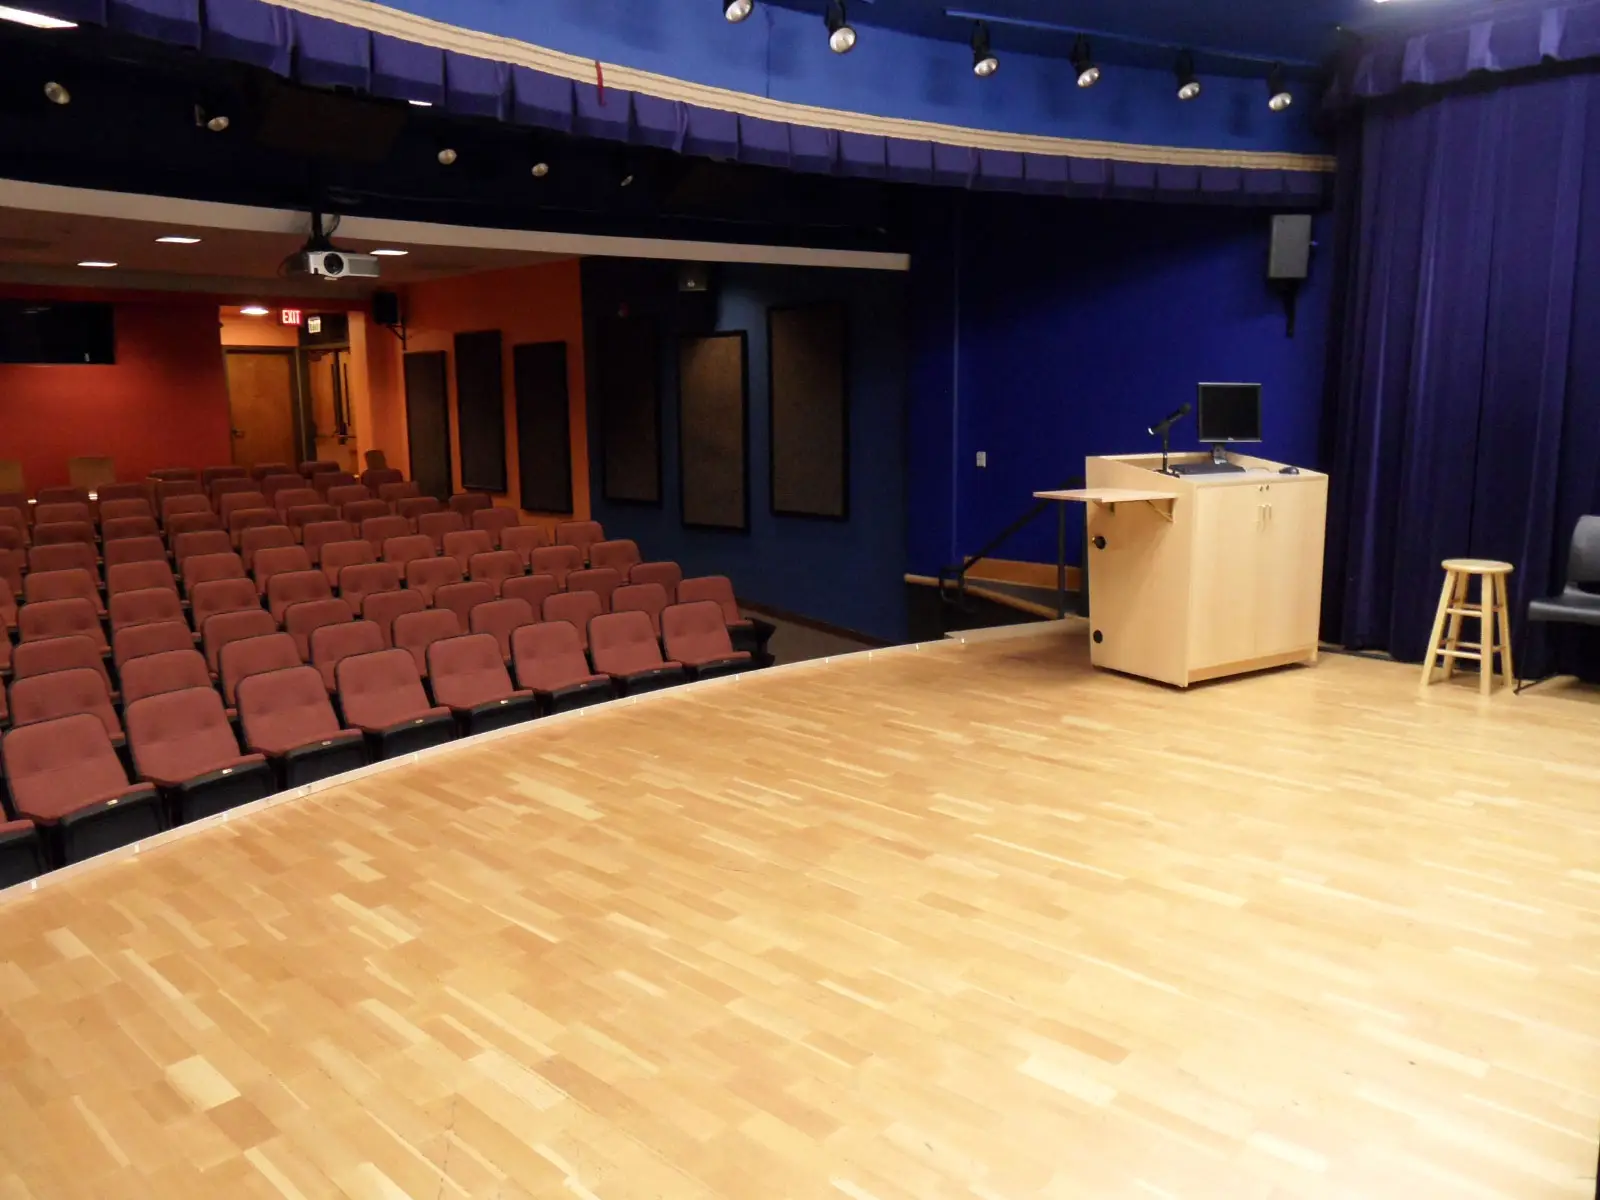 The McLoughlin Auditorium, a large theatre space with dozens of seats, located at the Oregon City campus